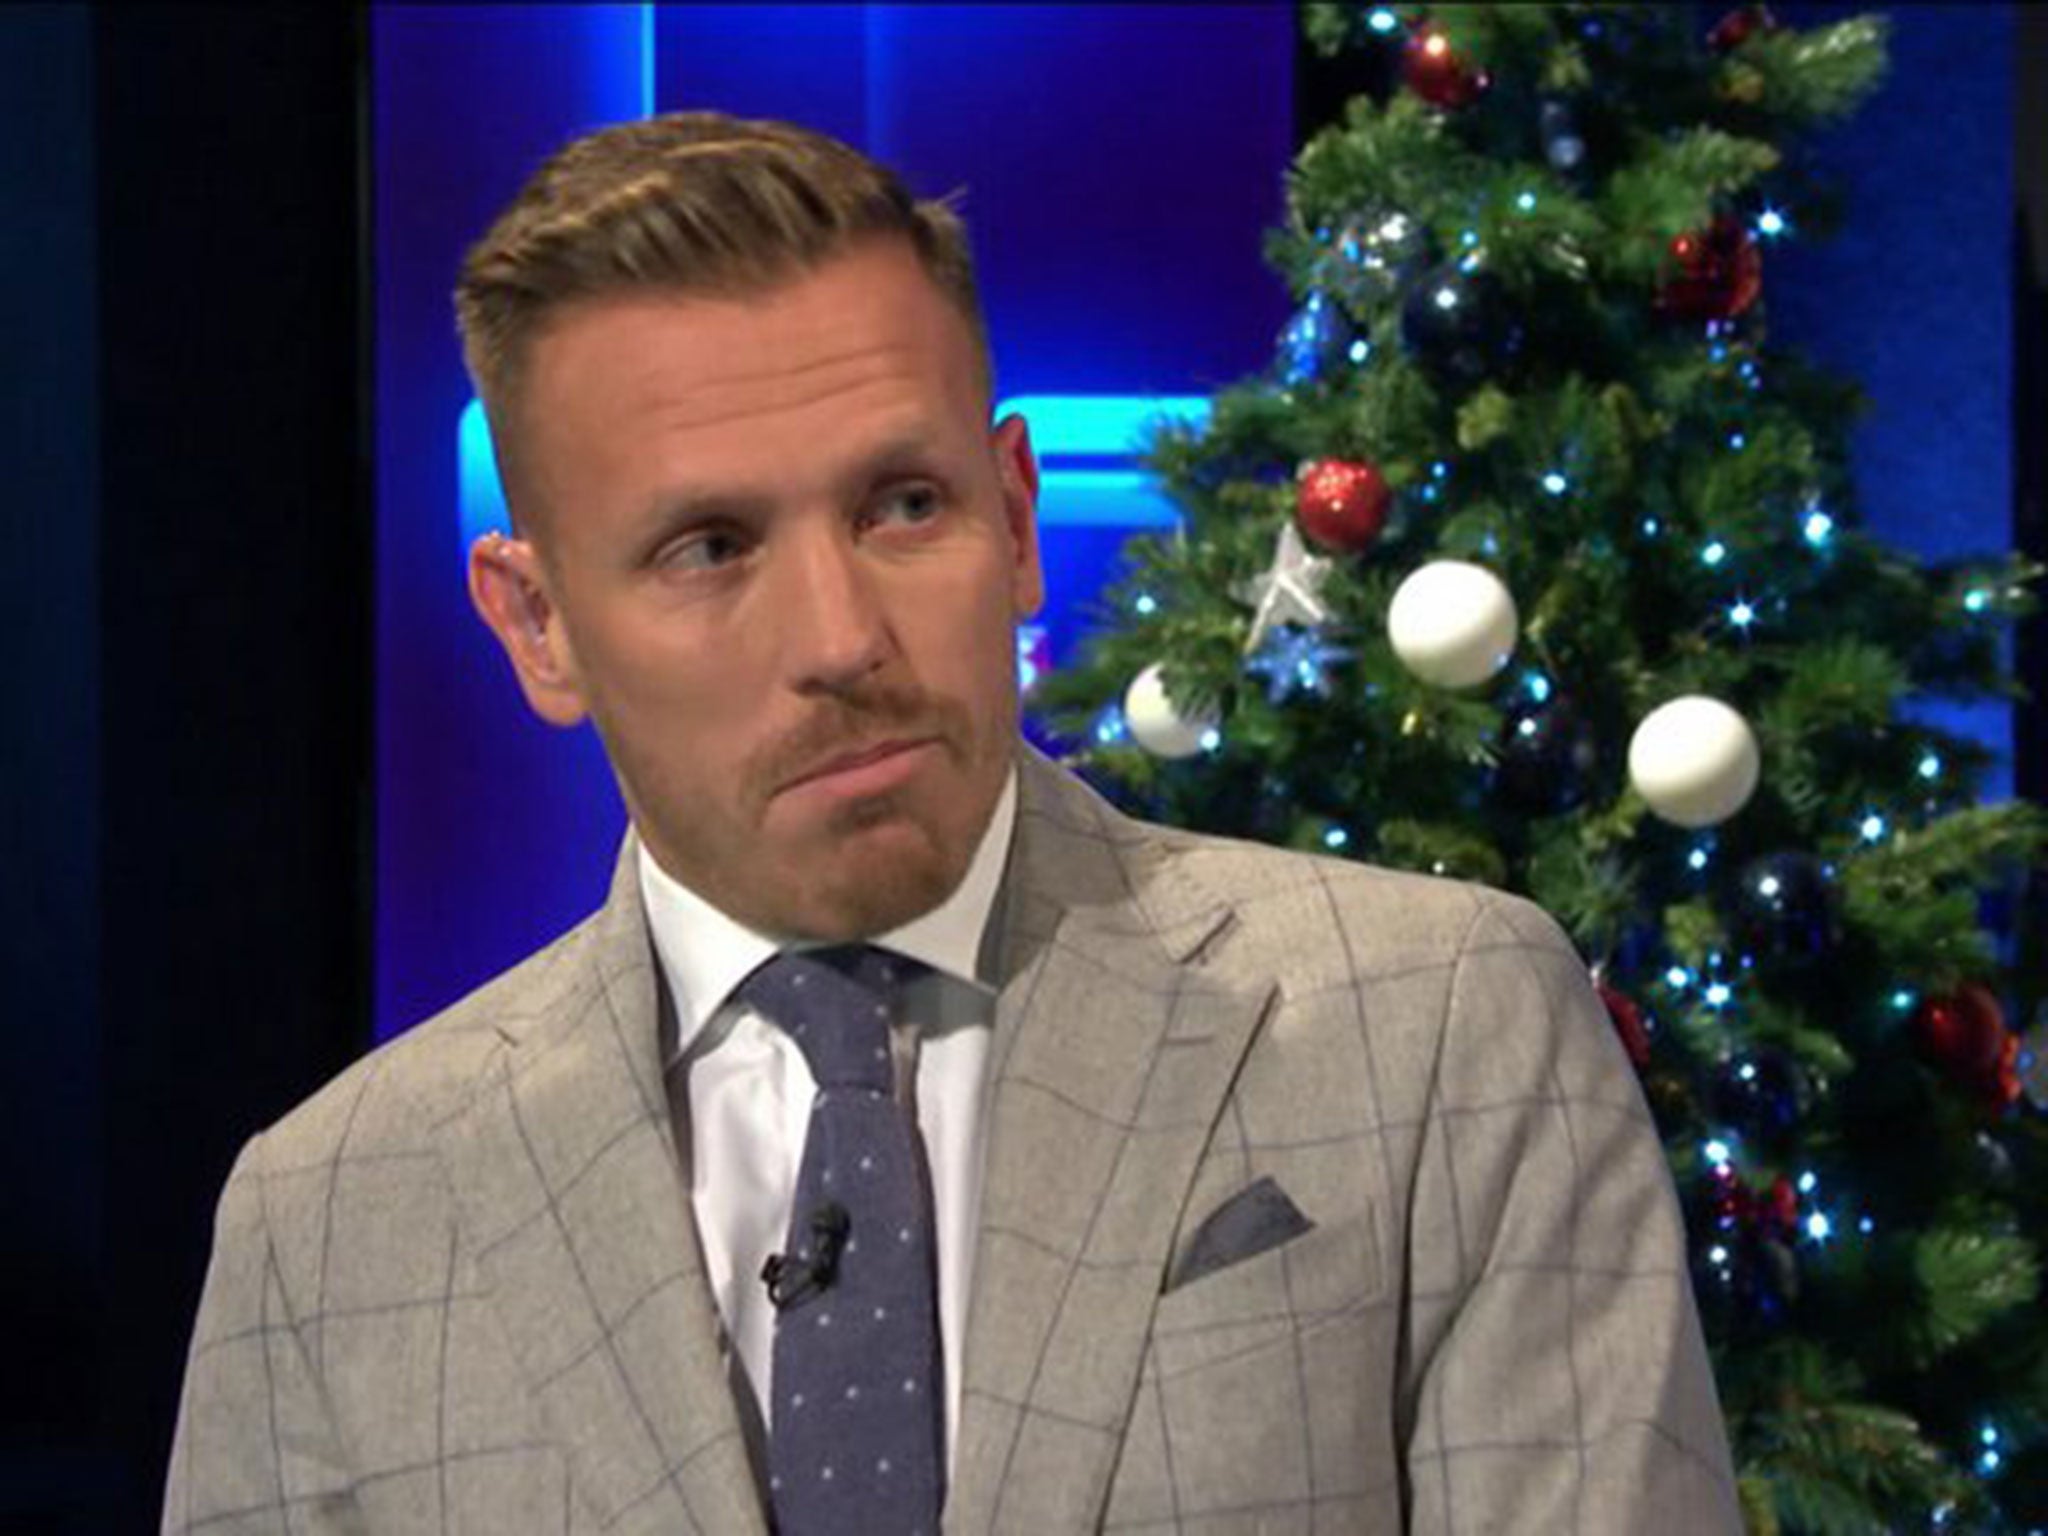 Former Manchester City and Liverpool striker Craig Bellamy made his Monday Night Football debut